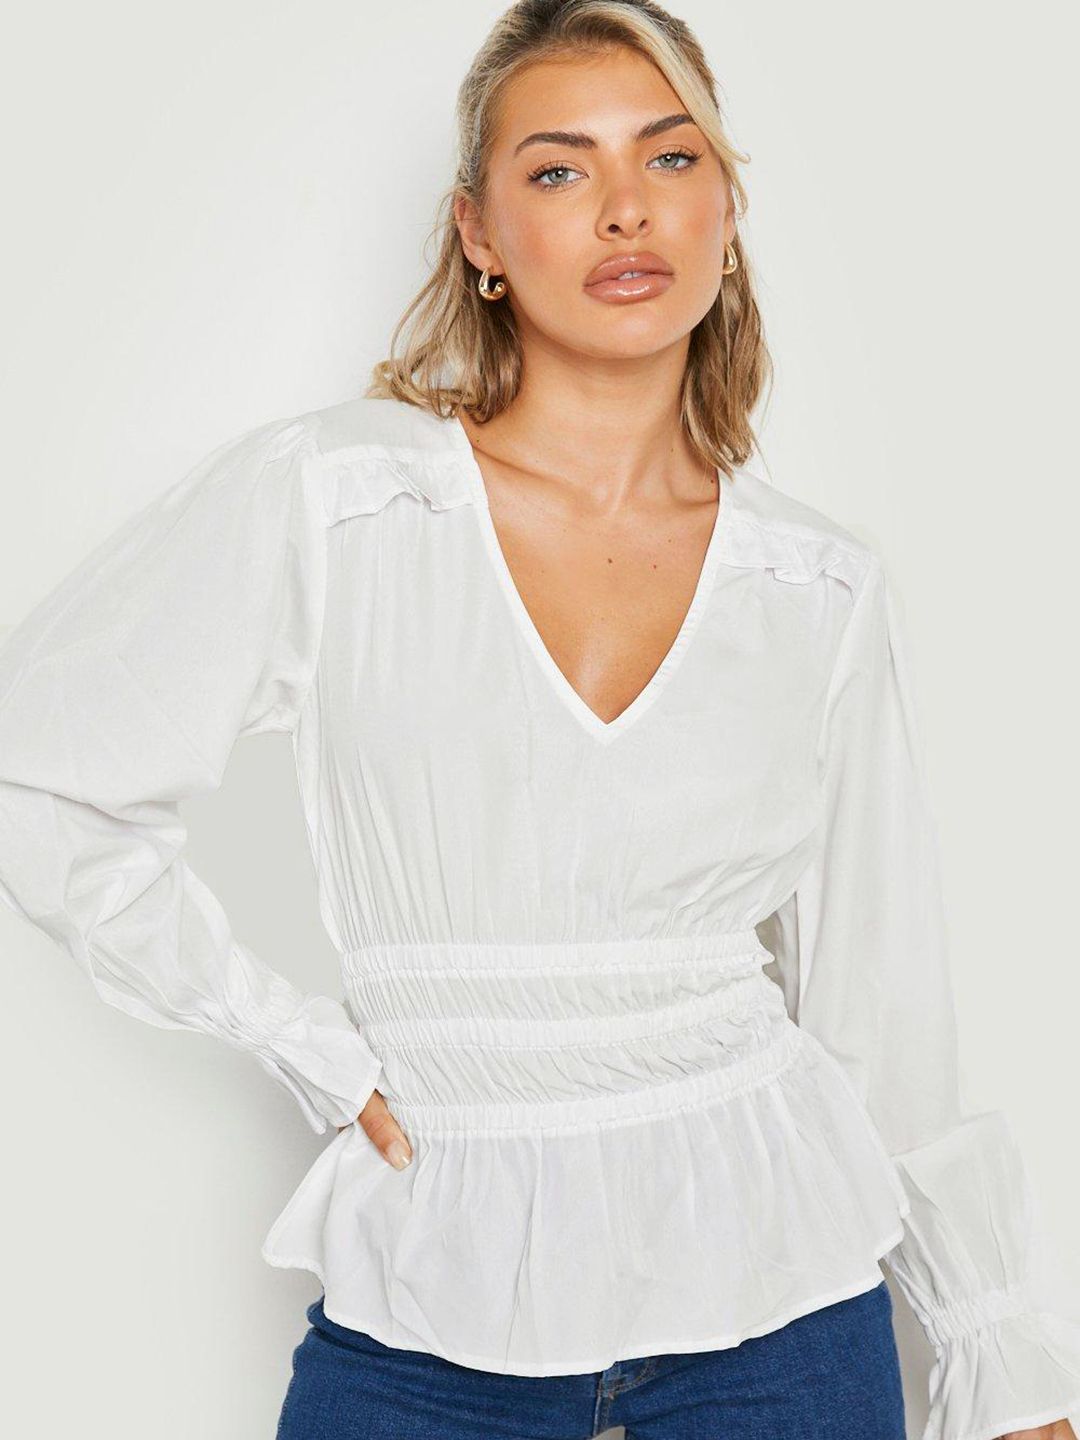 Boohoo V-Neck Cinched Waist Top Price in India